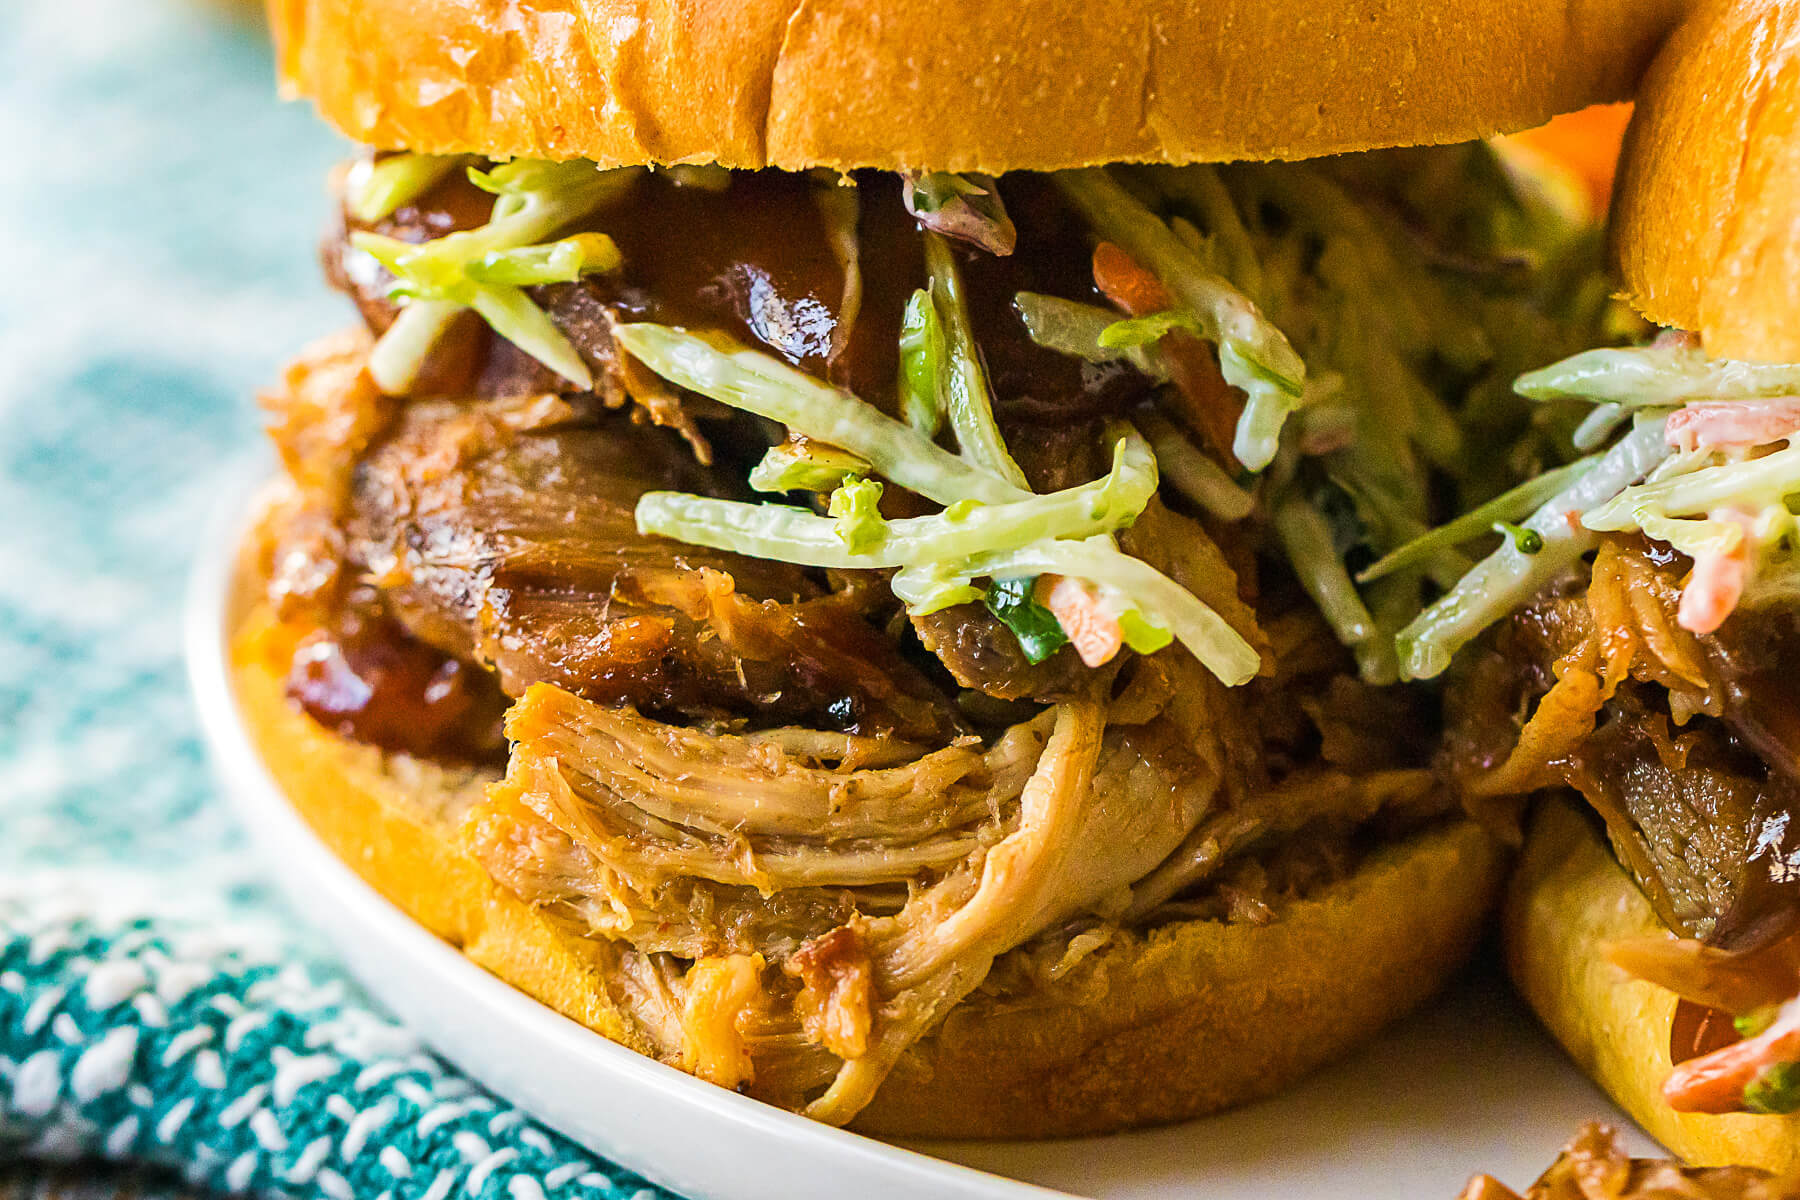 A soft white bun filled with Root Beer Pulled Pork and coleslaw.